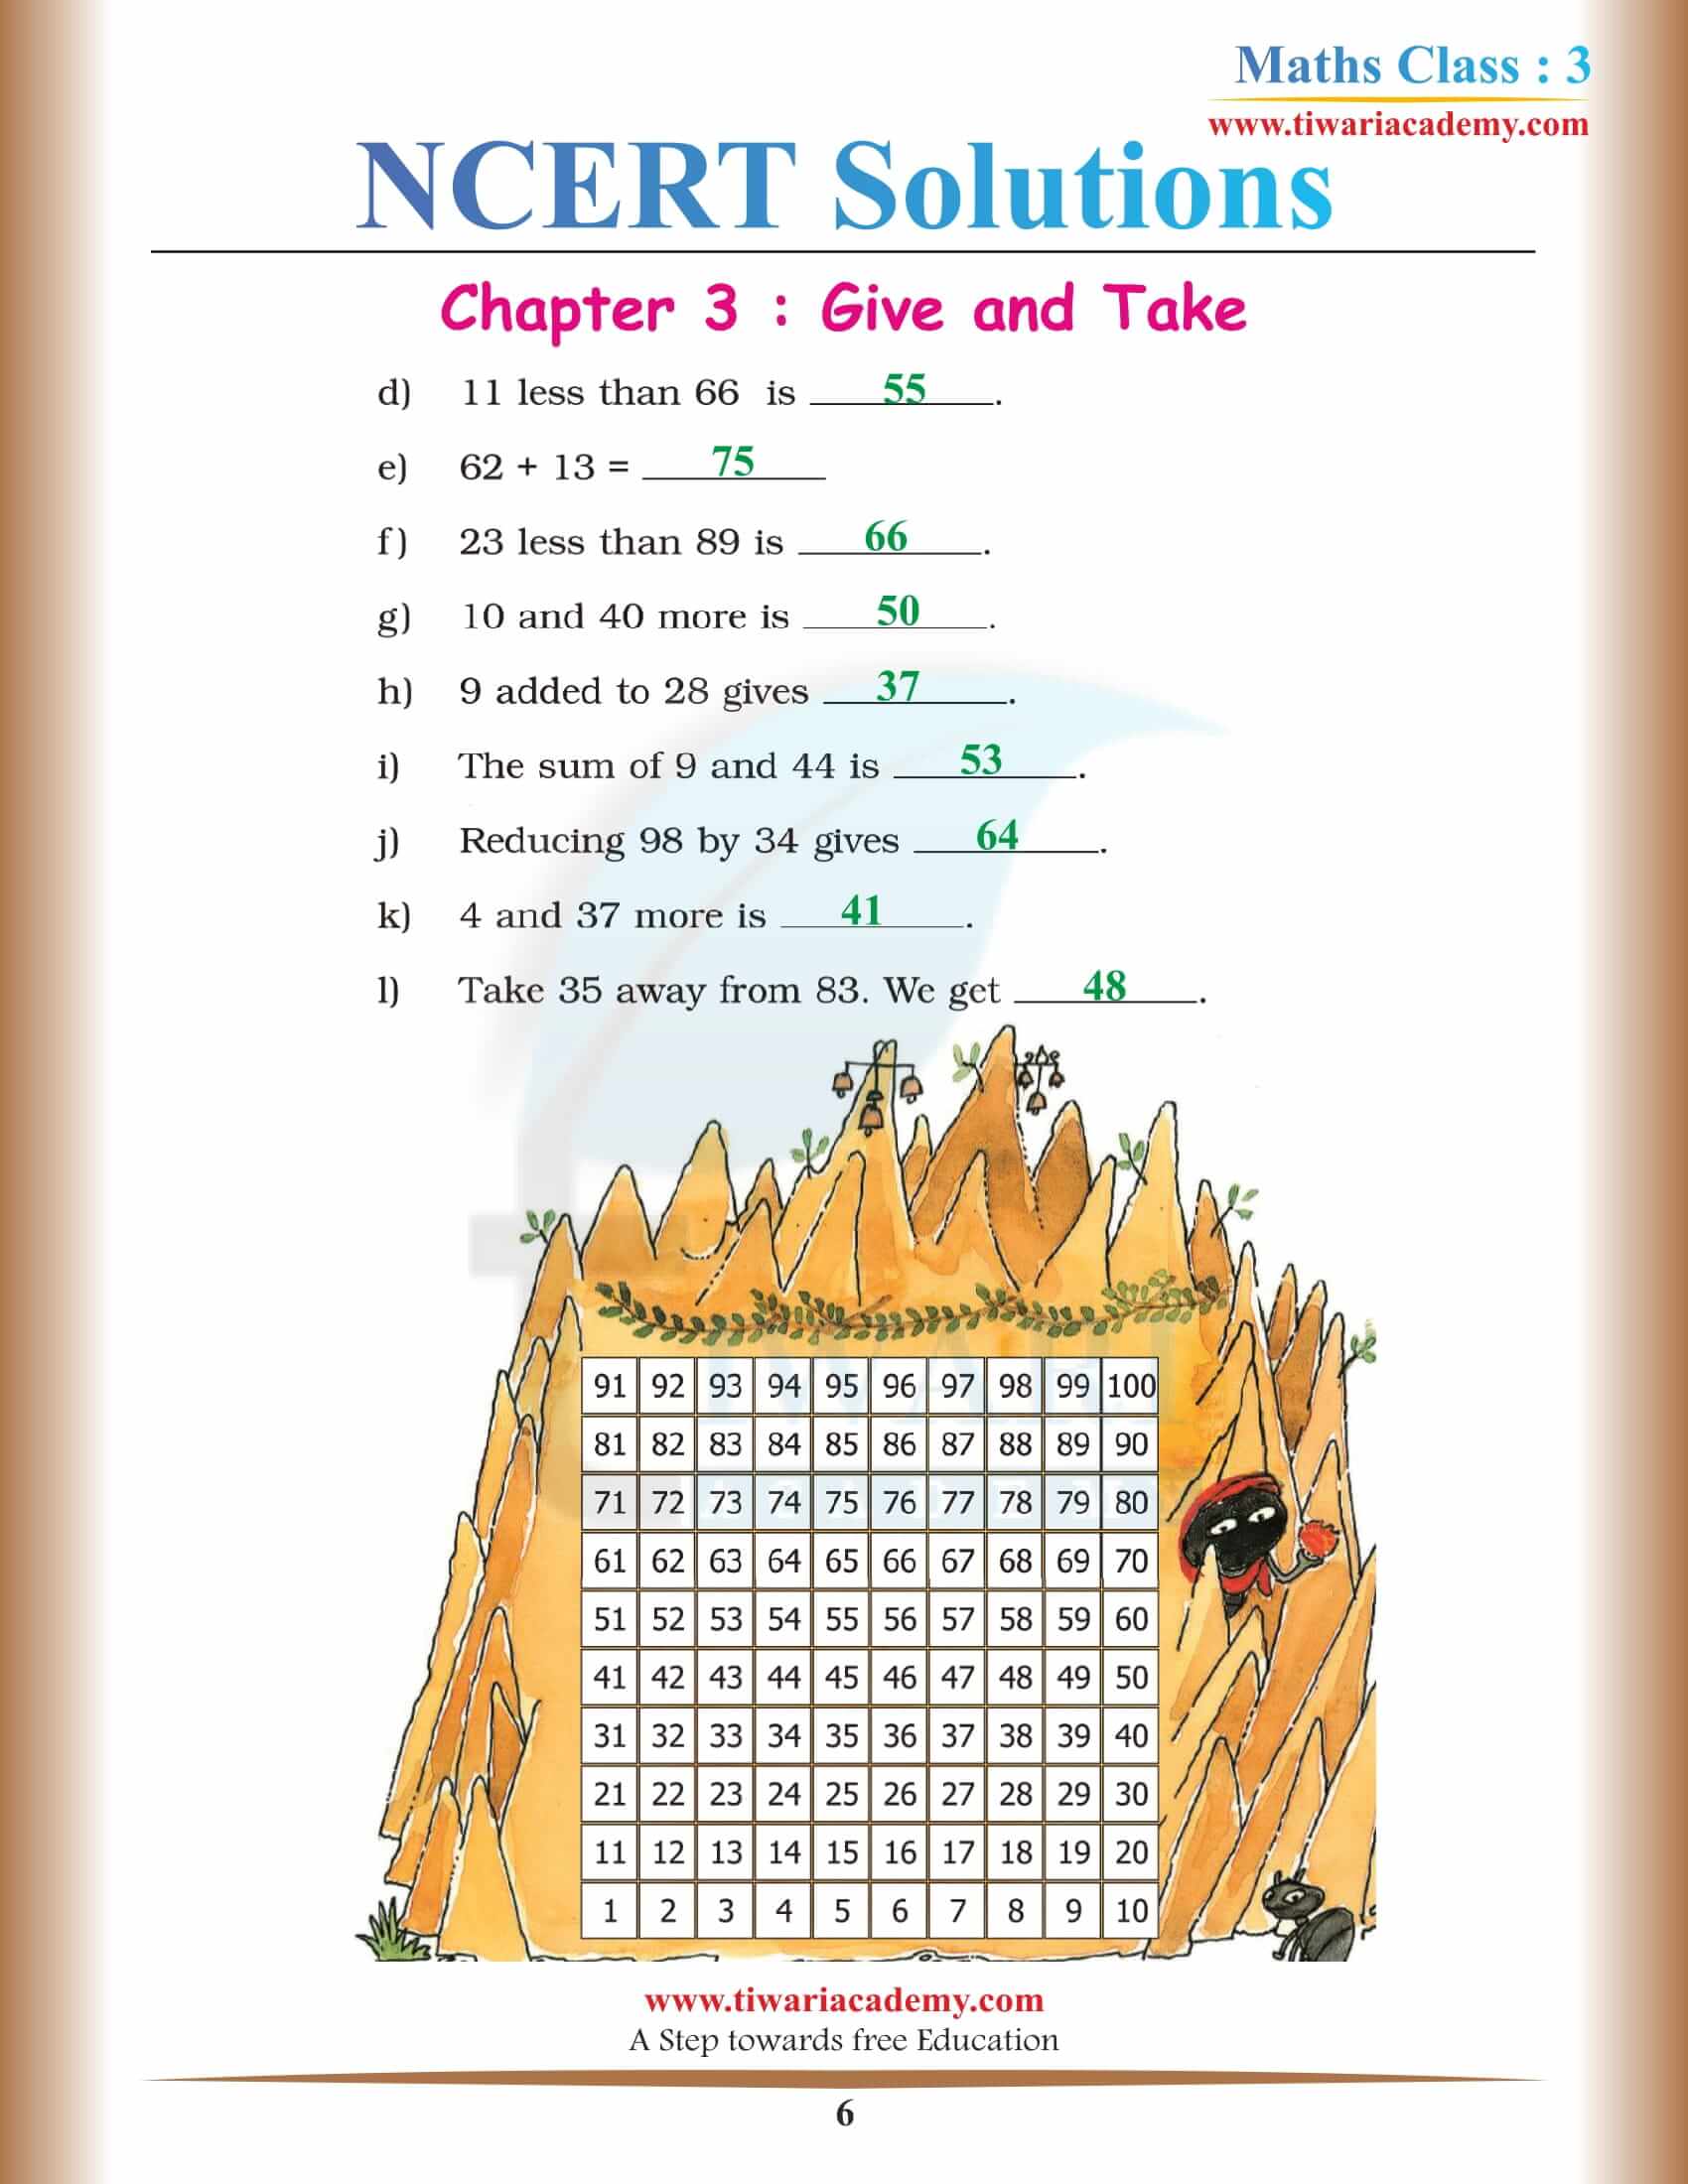 NCERT Solutions for Class 3 Maths Chapter 3 free download